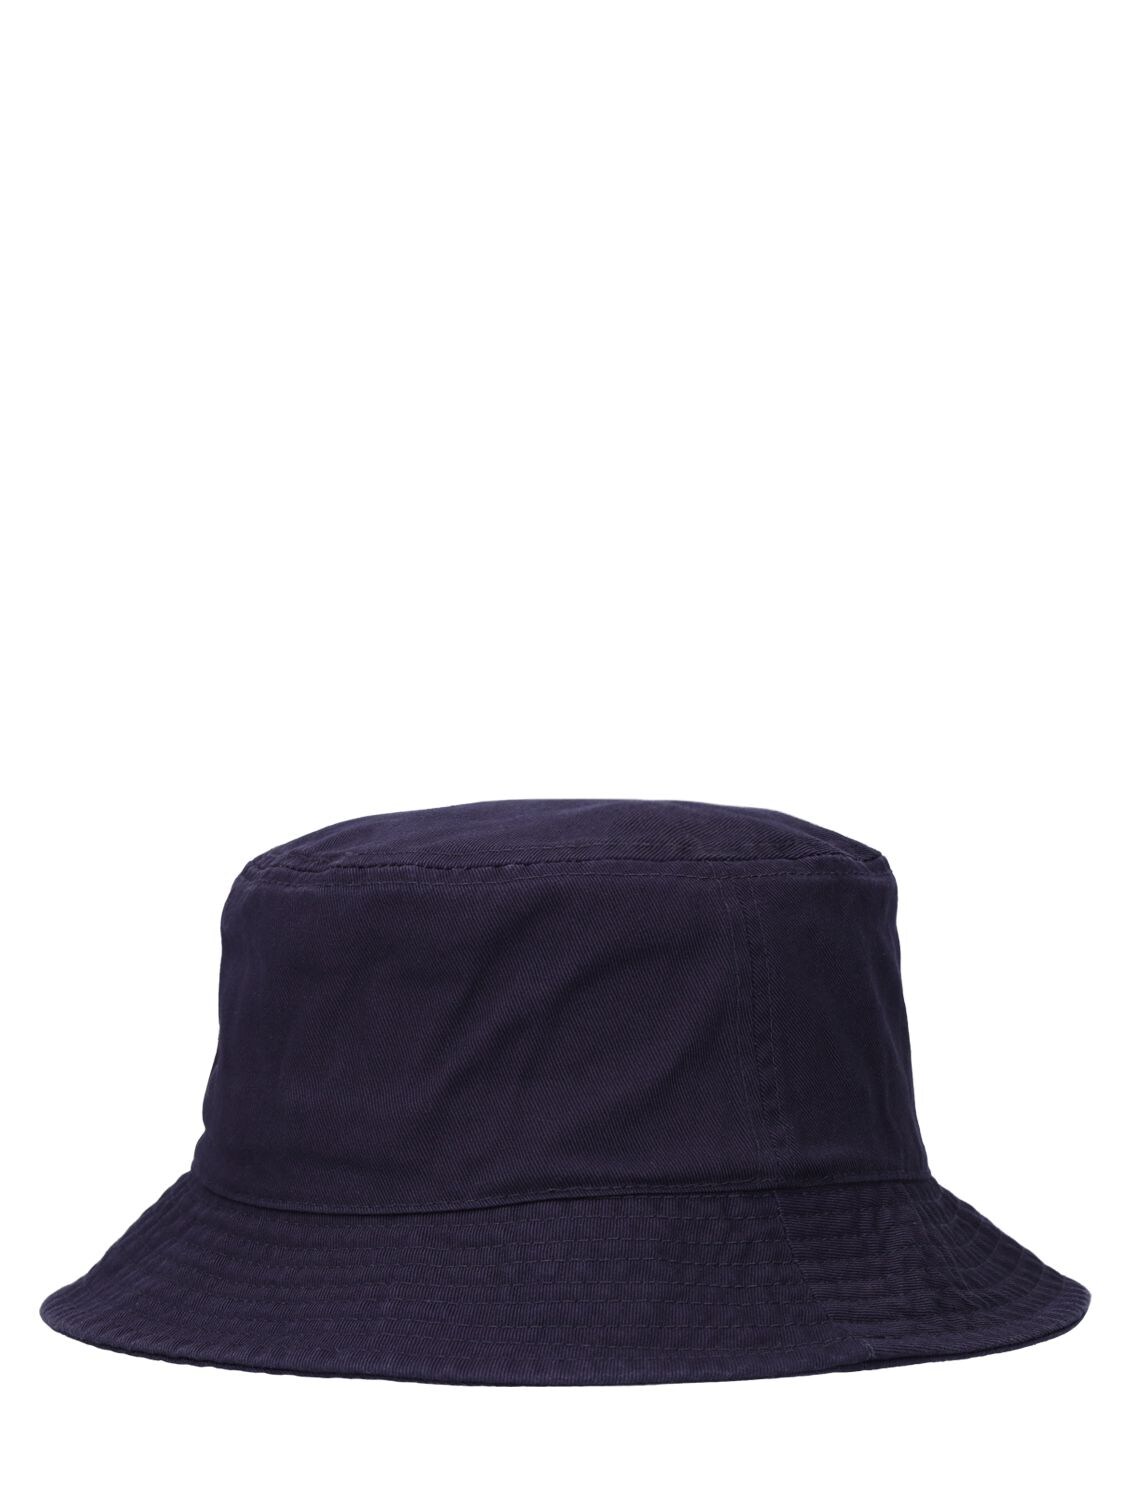 Shop Kangol Washed Cotton Bucket Hat In Navy